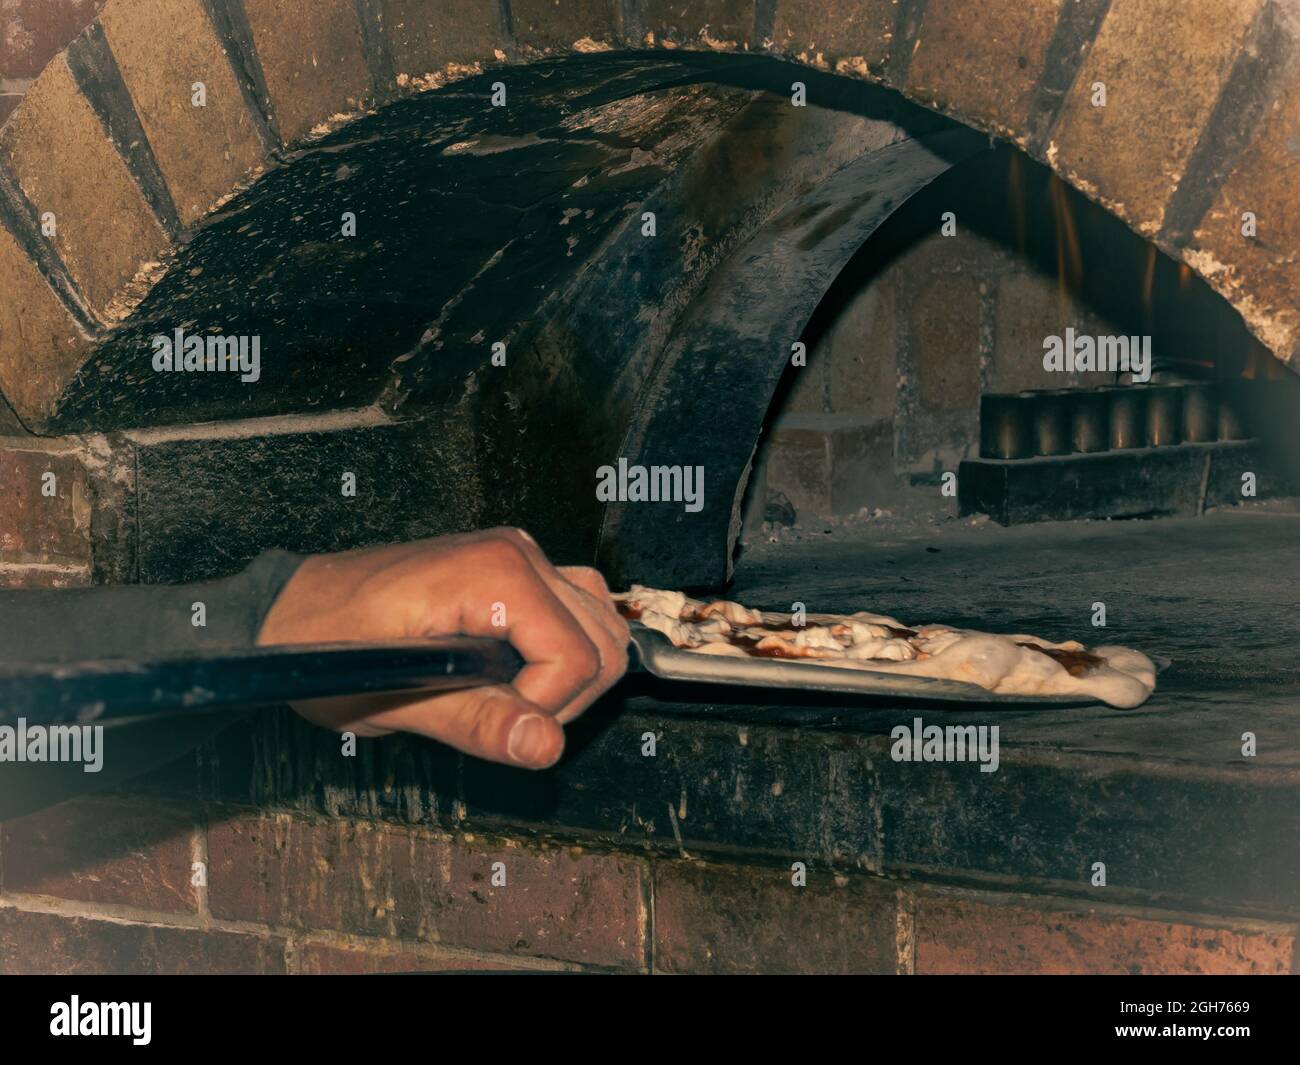 detail of the arm of a pizza chef who is putting a pizza in the oven Stock Photo